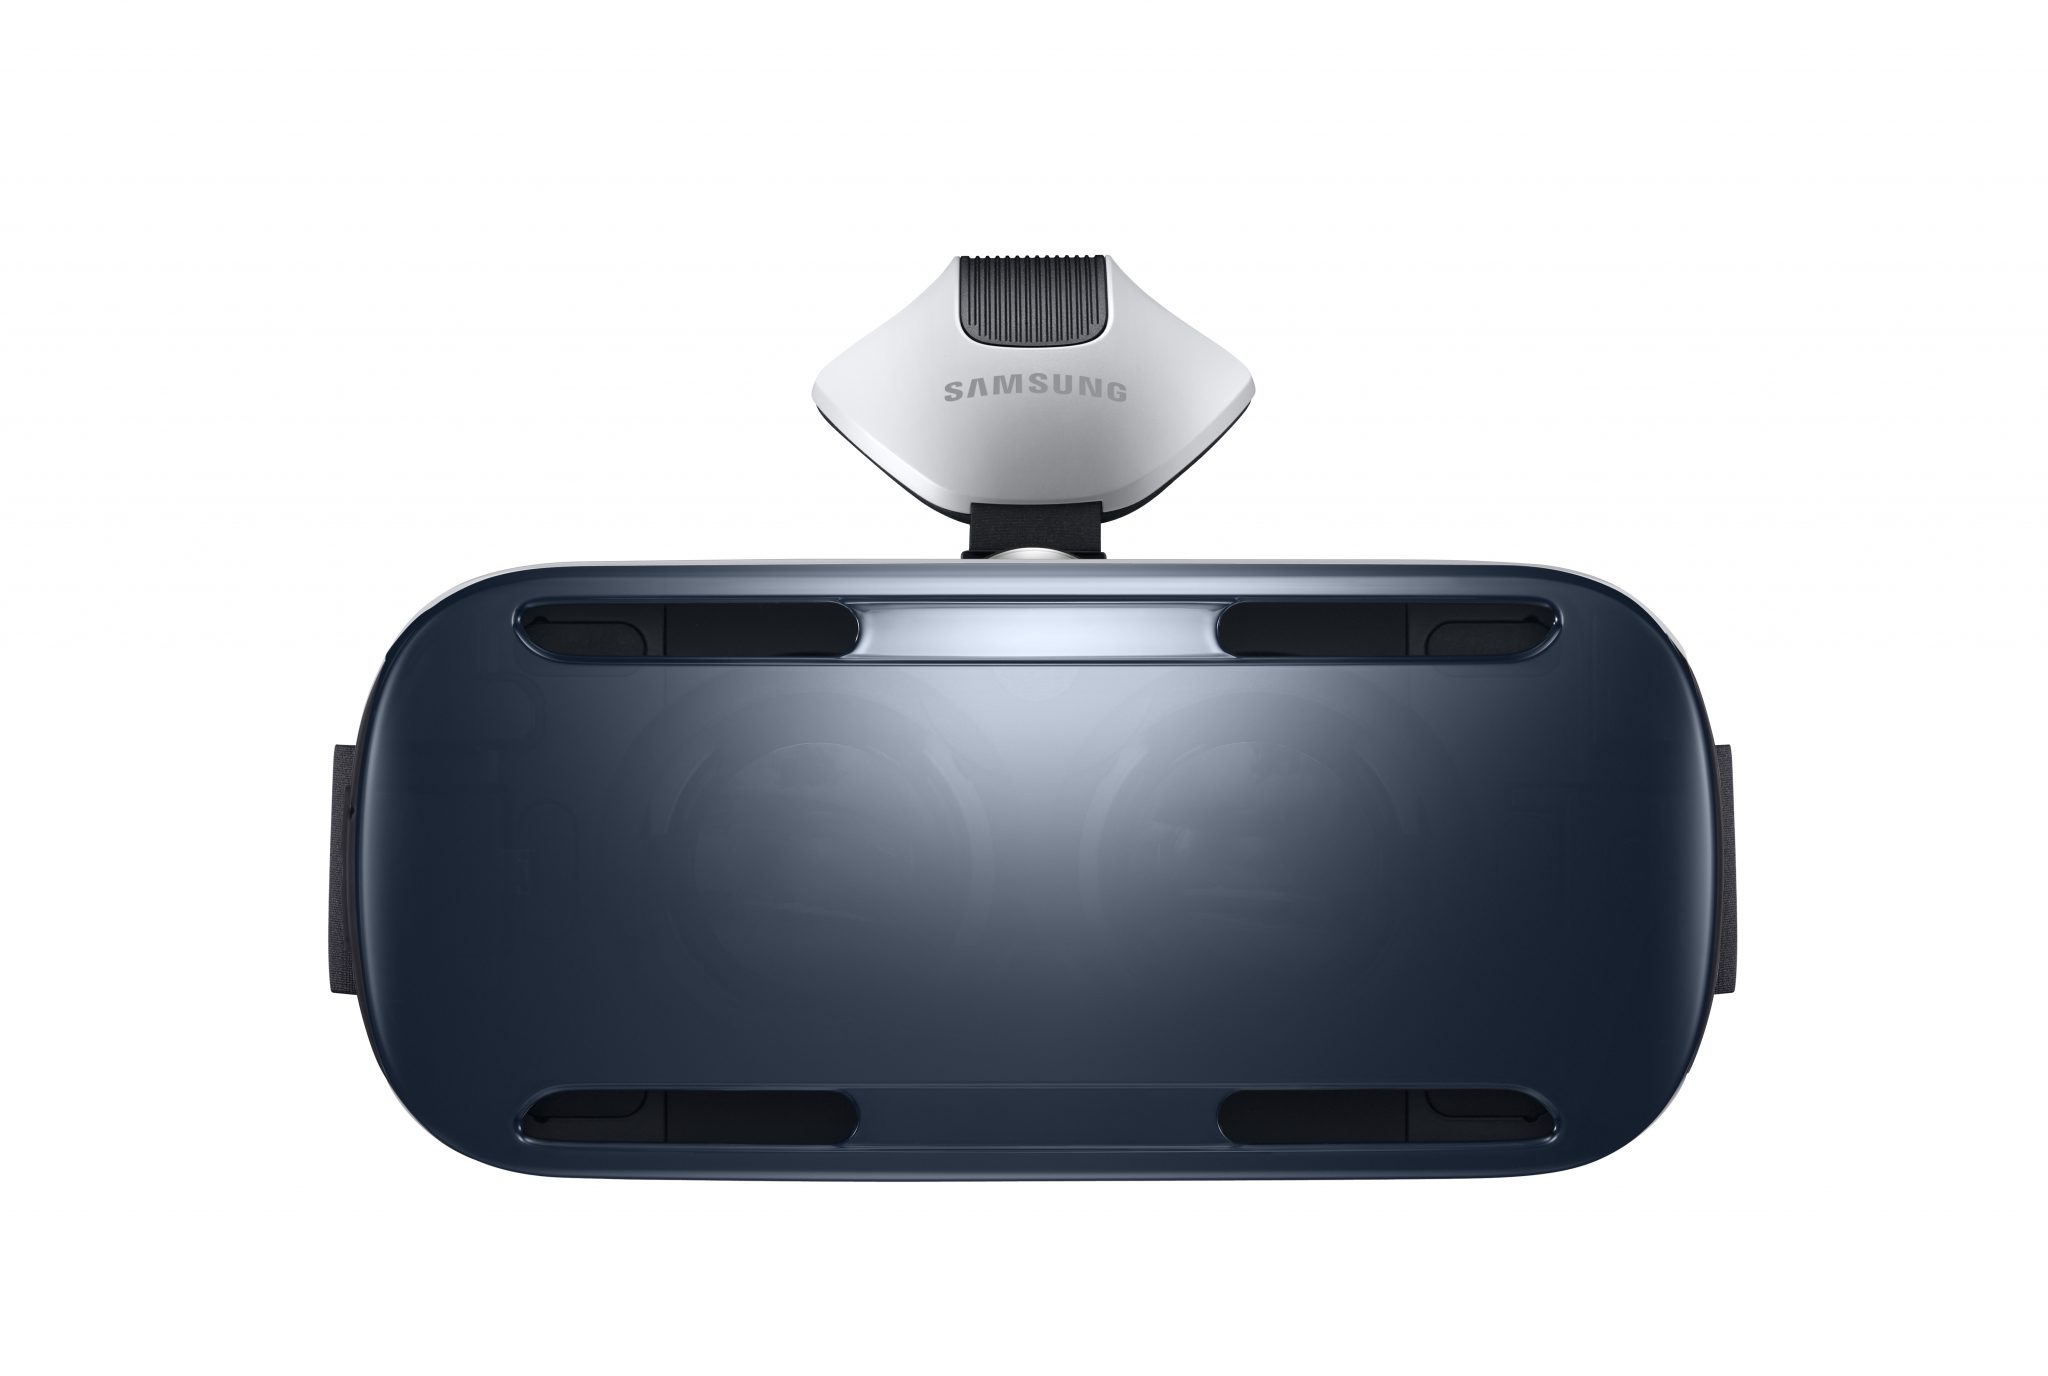 GearVR AndroDollar 1 - Samsung Unveils the Gear VR Headset; A Virtual Reality Accessory For The Galaxy Note 4